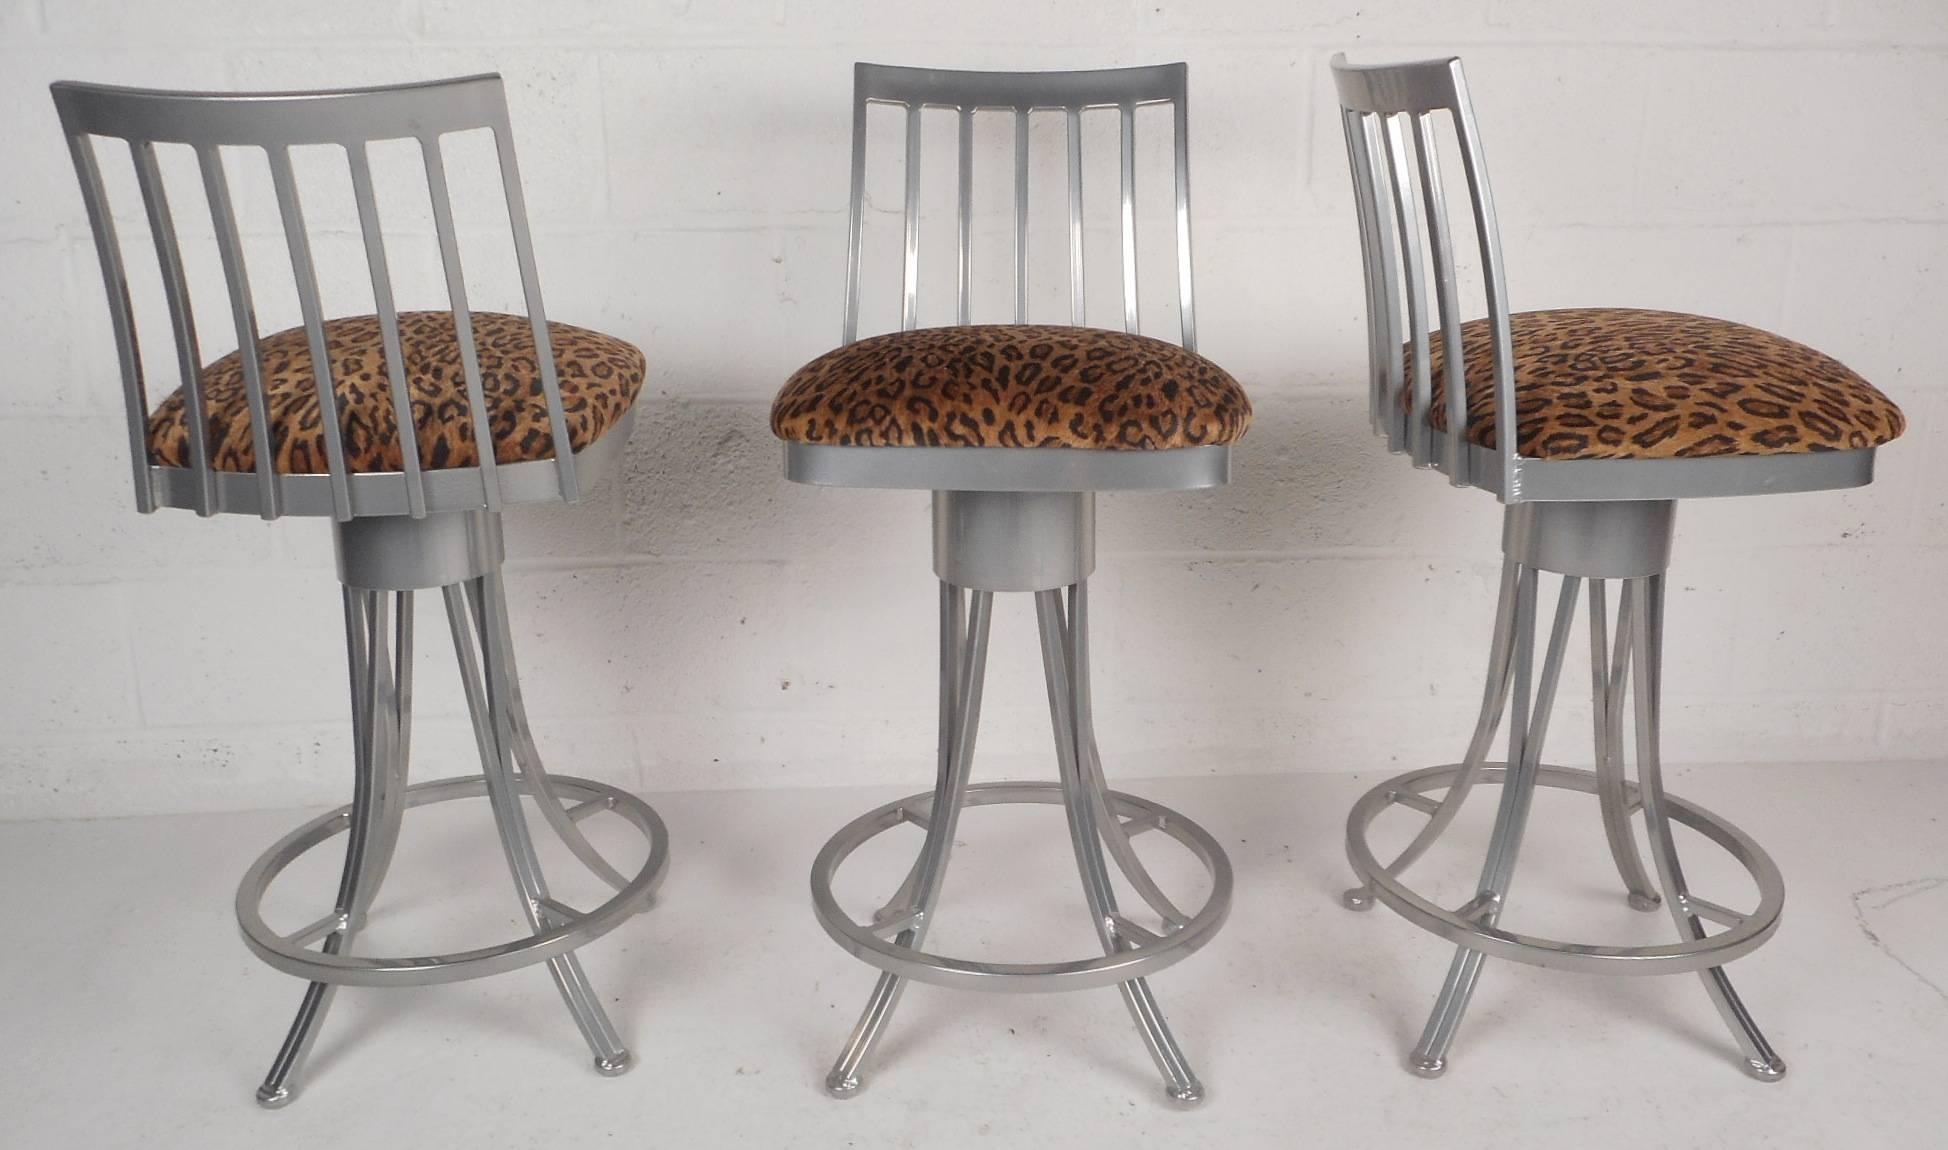 This gorgeous Mid-Century Modern style set of three bar stools feature a unique slatted backrest with stylish curved legs. Sleek design with plush velvet leopard upholstery and a circular kick rest placed perfectly for comfort. This unique set have